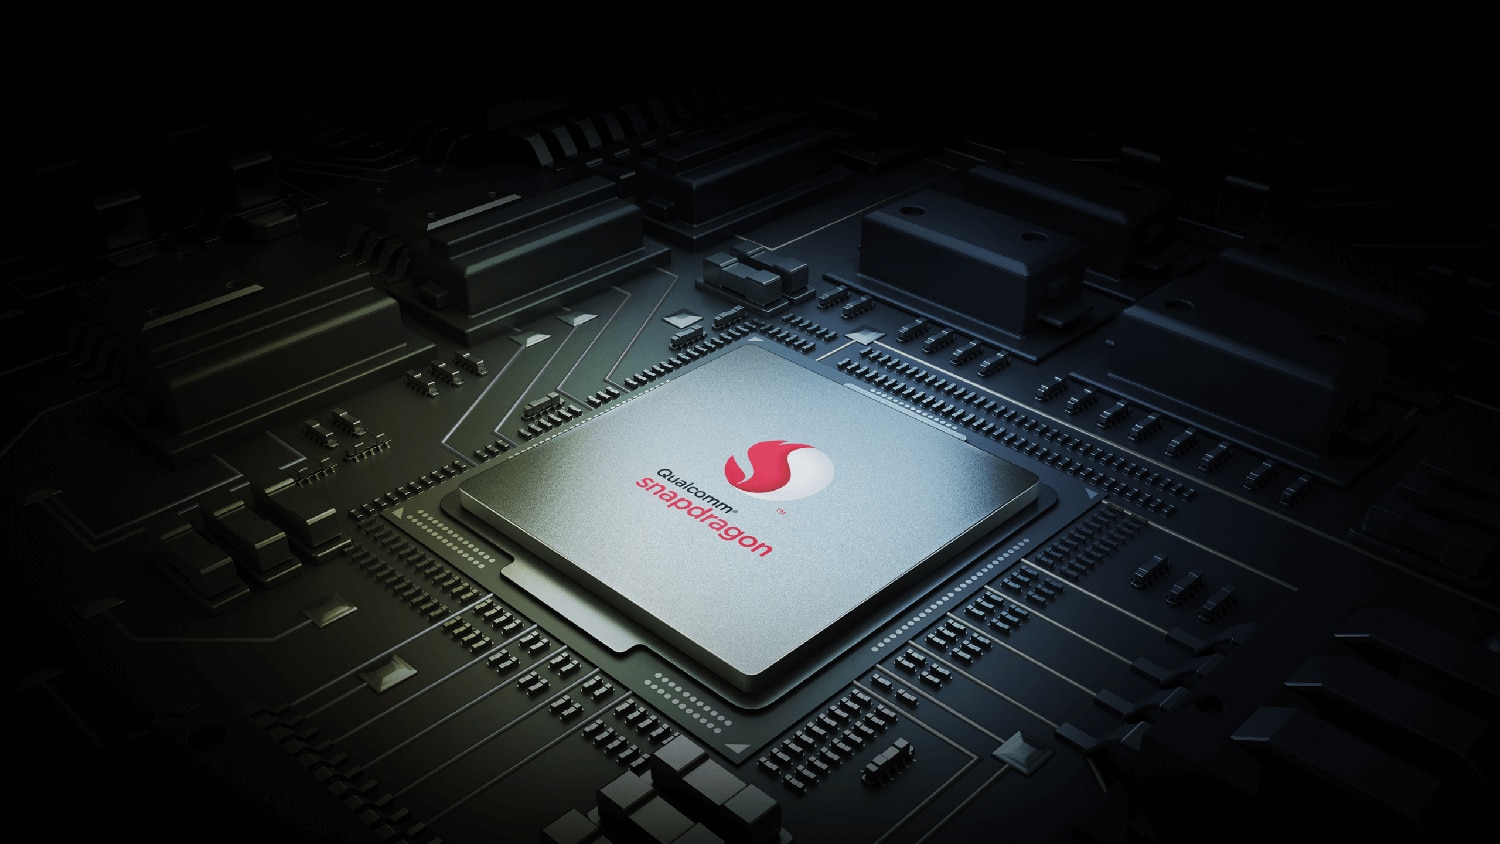 Qualcomm introduces three new midrange Snapdragon chips for non-5G phones.